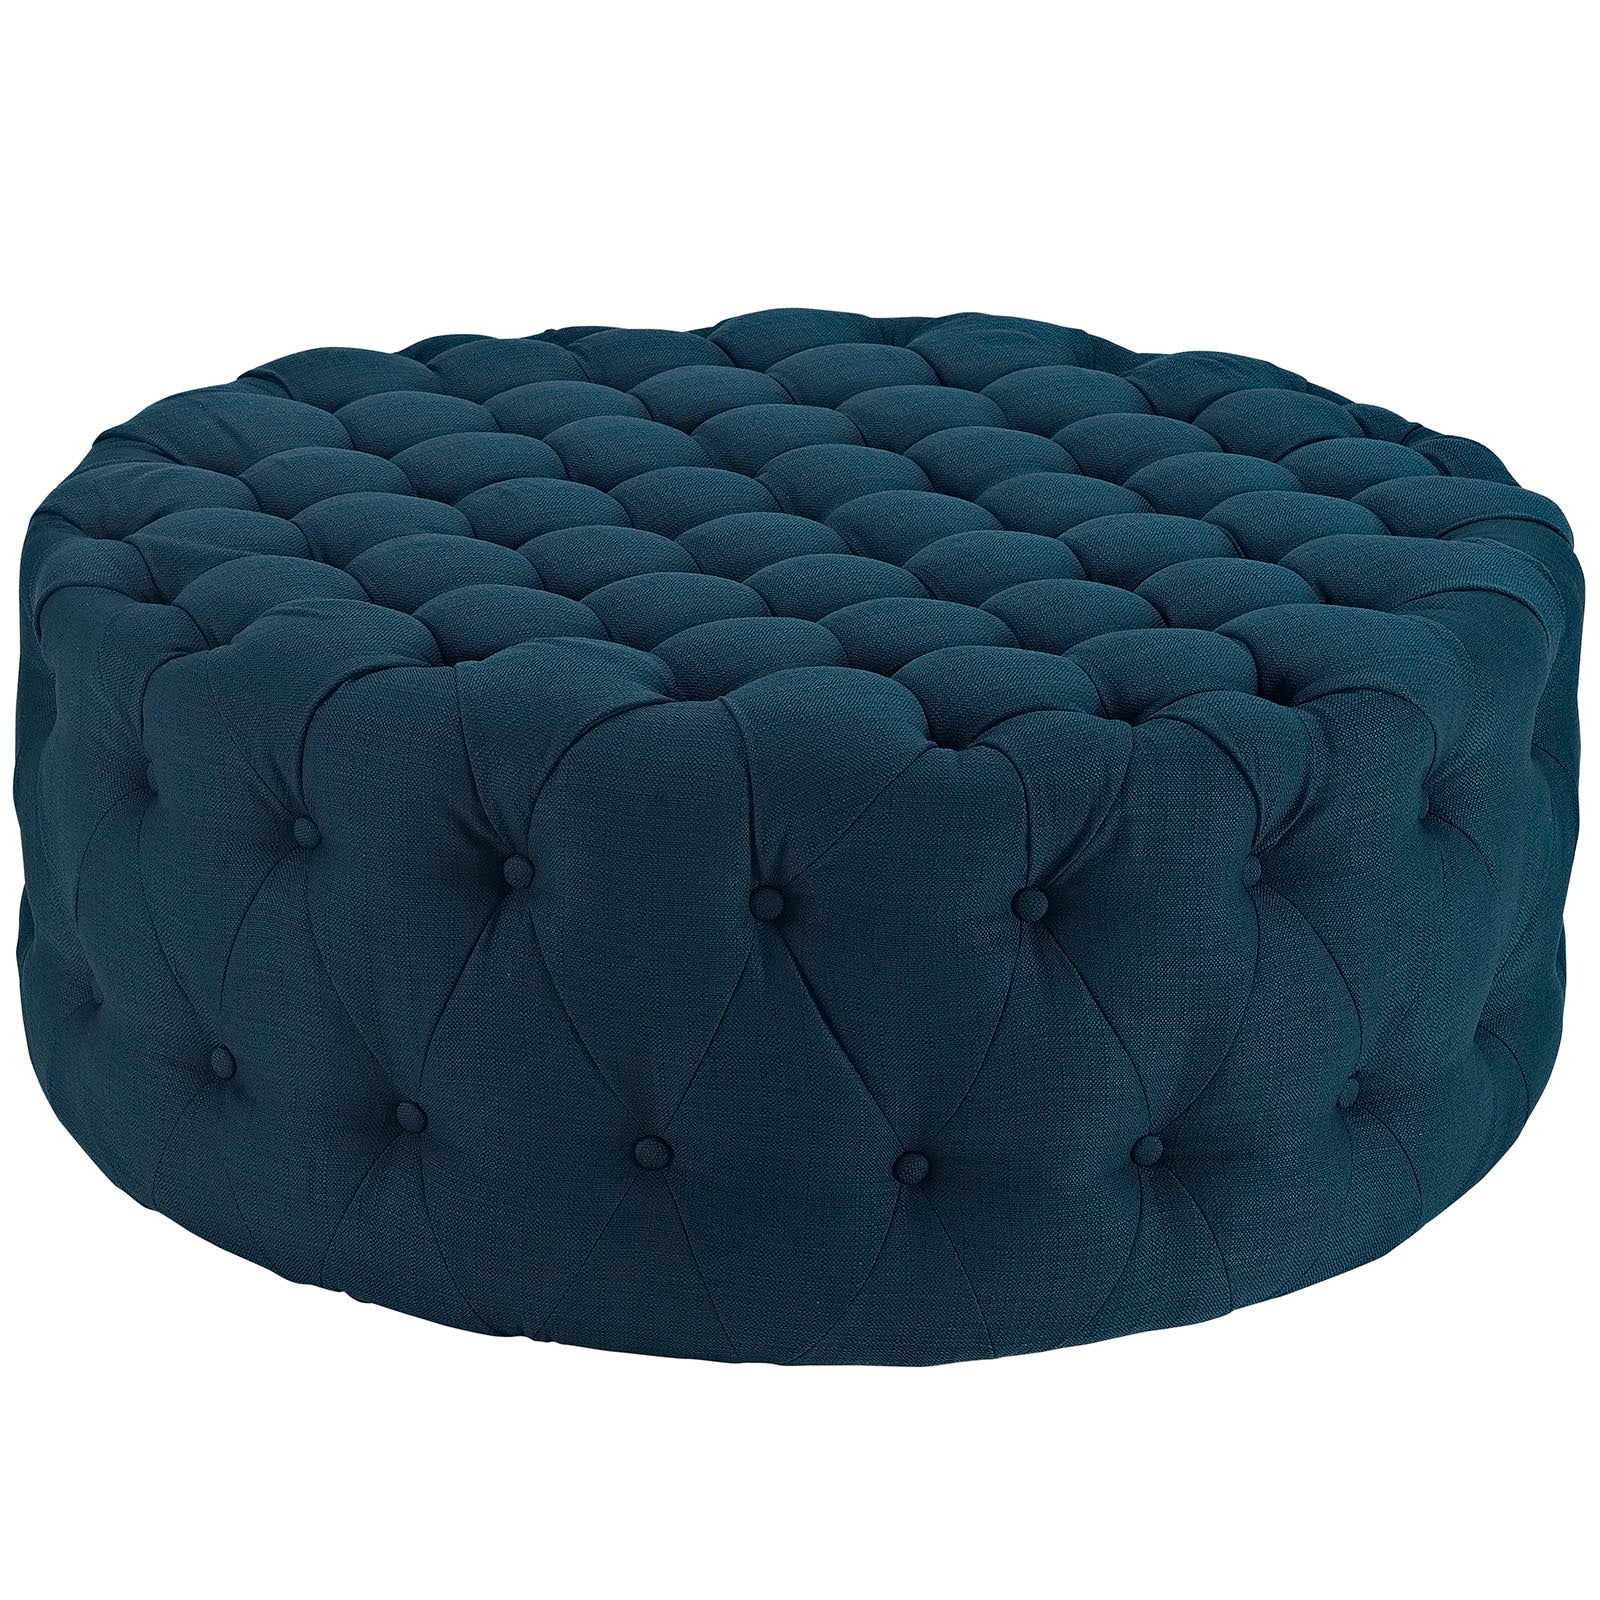 Amour Upholstered Fabric Ottoman